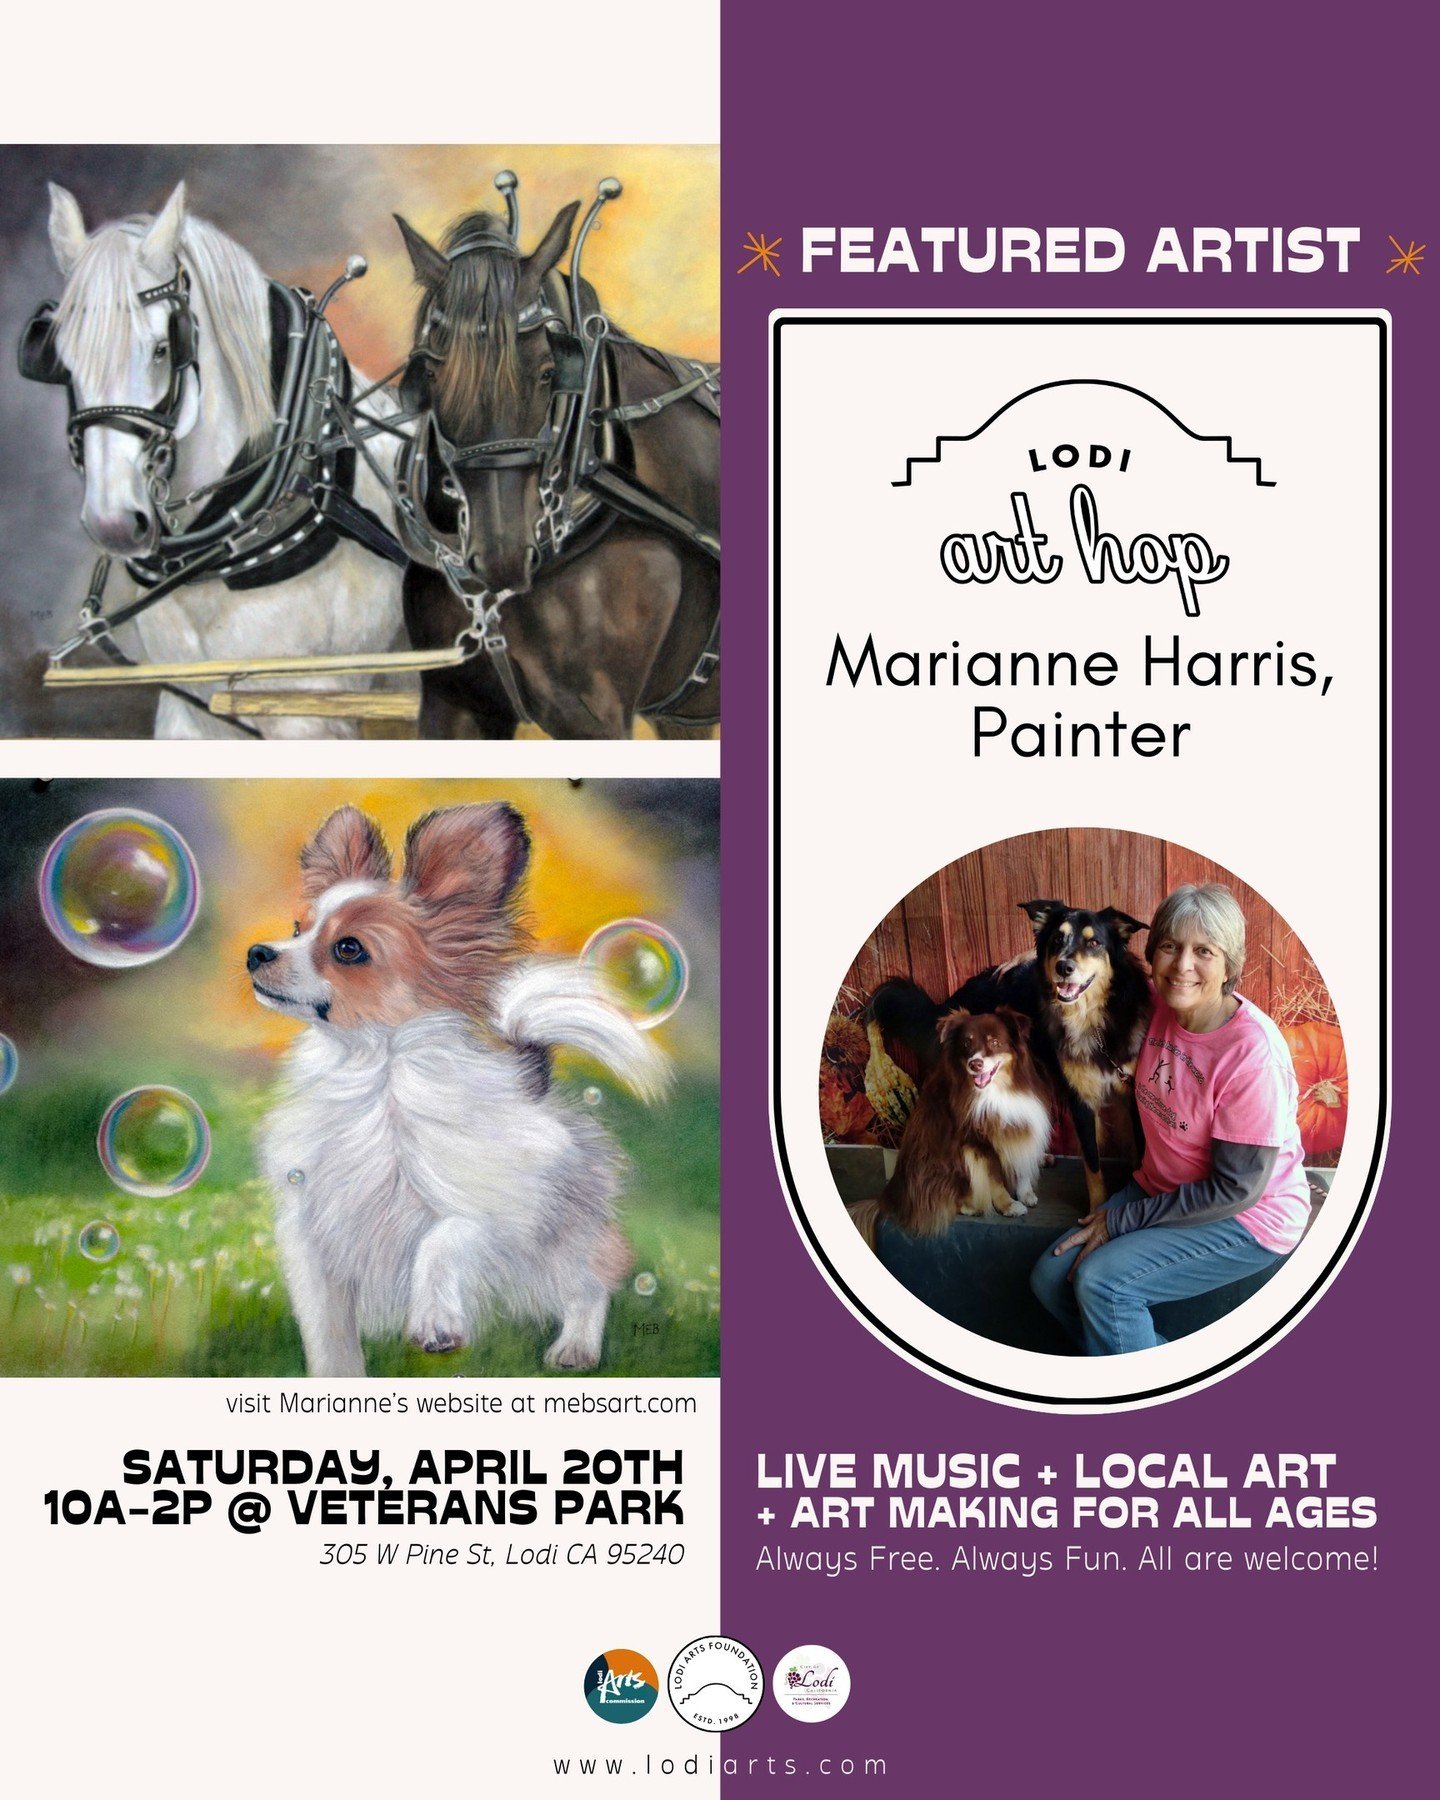 ✨Featured Artist ✨ Marianne Harris! We're so happy to have Marianne and her pastels back at the Lodi Art Hop this Saturday! 🎉 ⁠
⁠
📍Lodi Art Hop⁠
🗓 Saturday, April 20th from 10a-2p⁠
🌲 Veterans Park, 305 W Pine St⁠
⁠
&quot;I am Marianne Harris, als